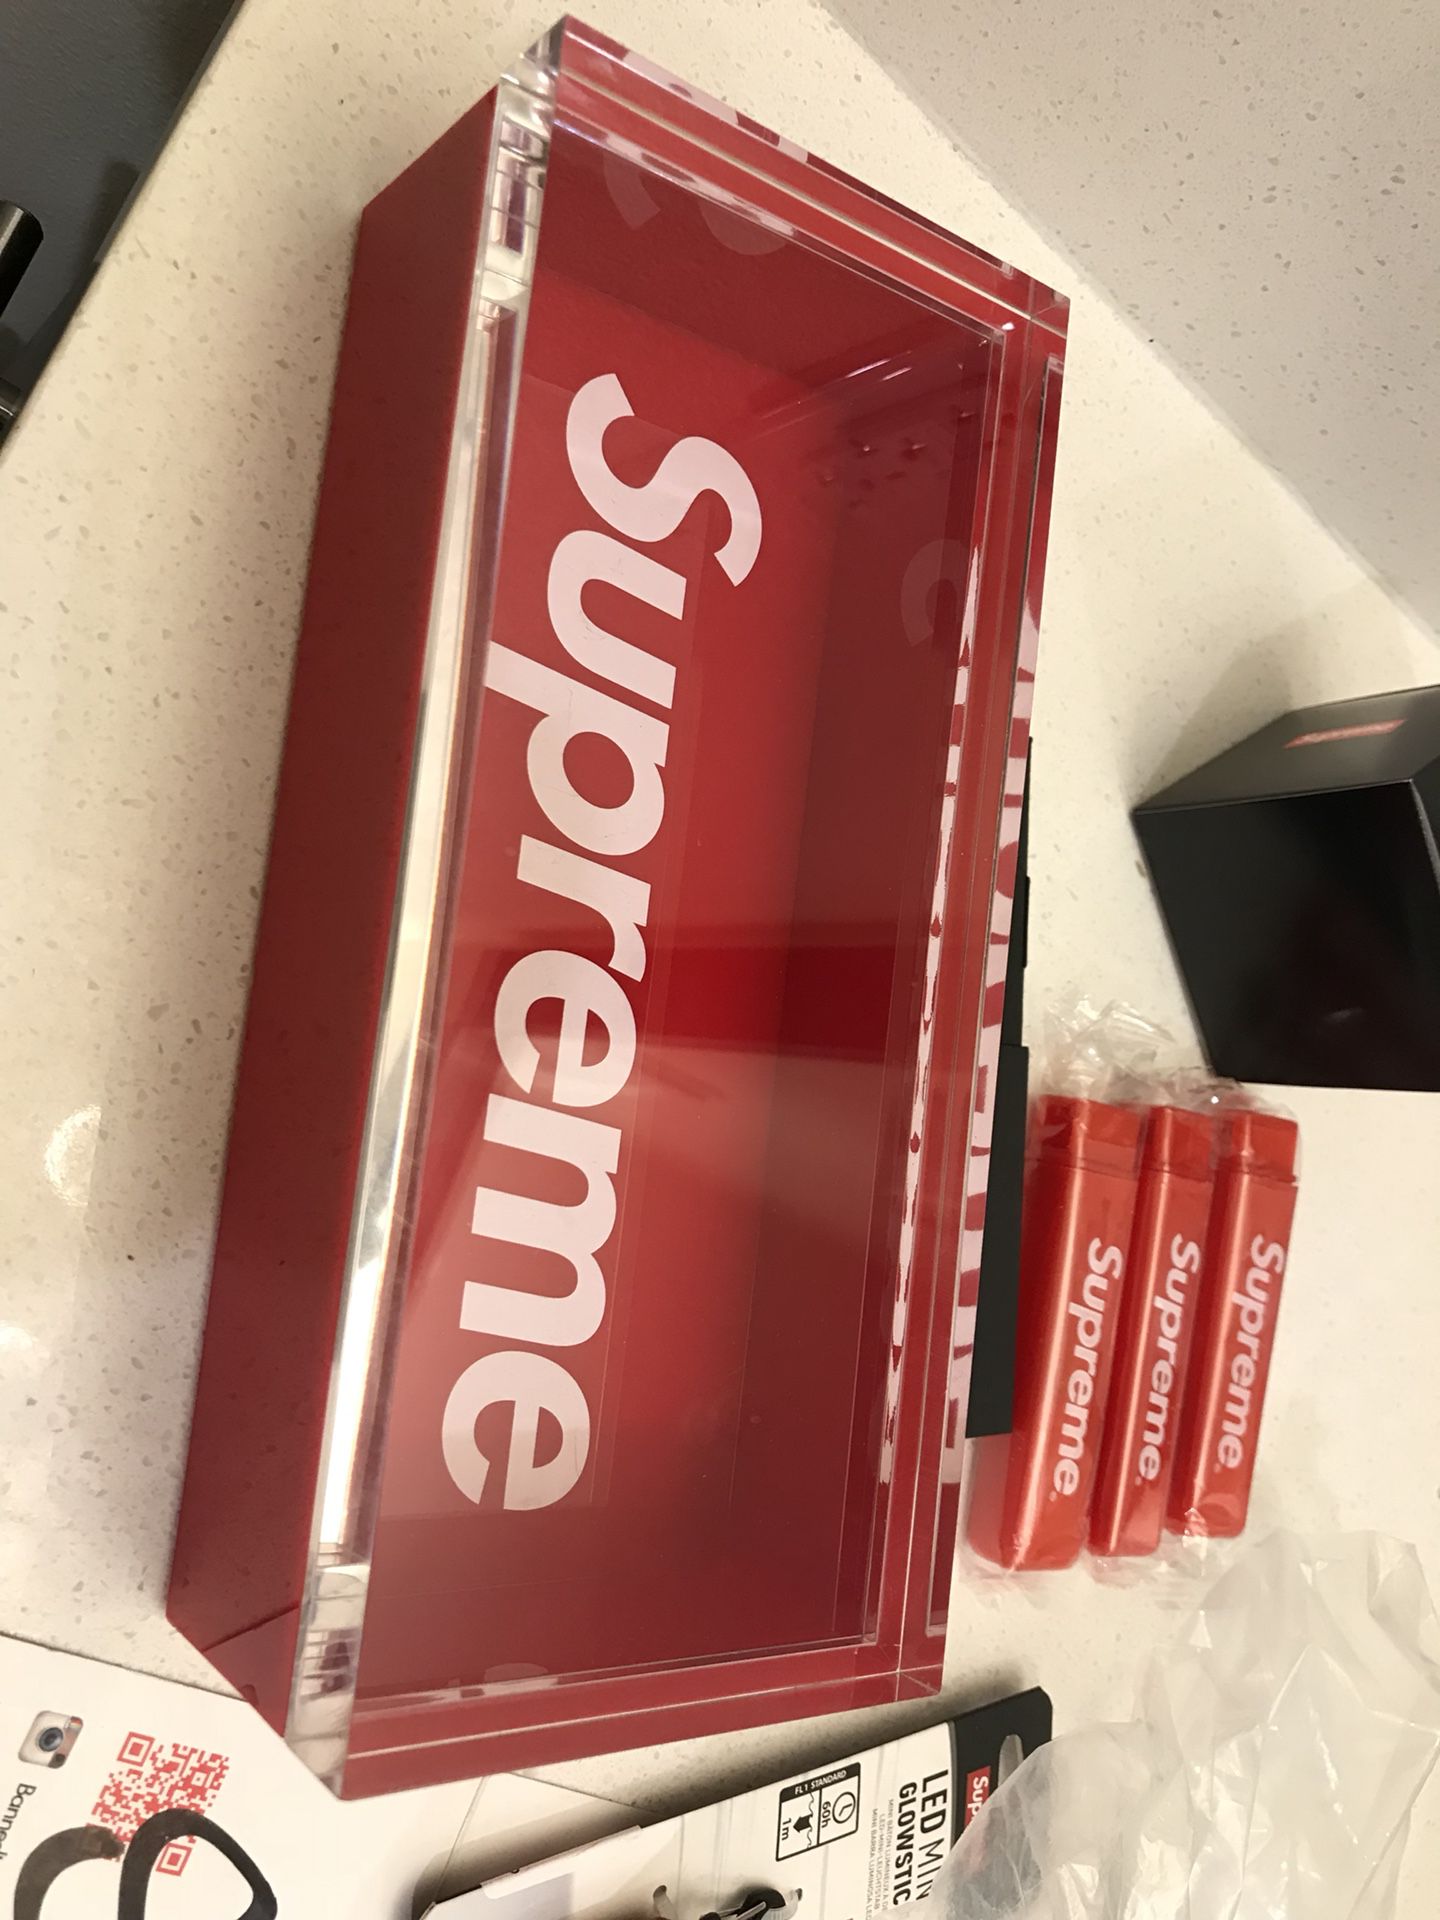 FW16 Supreme lucite box for Sale in Lakewood, CO - OfferUp